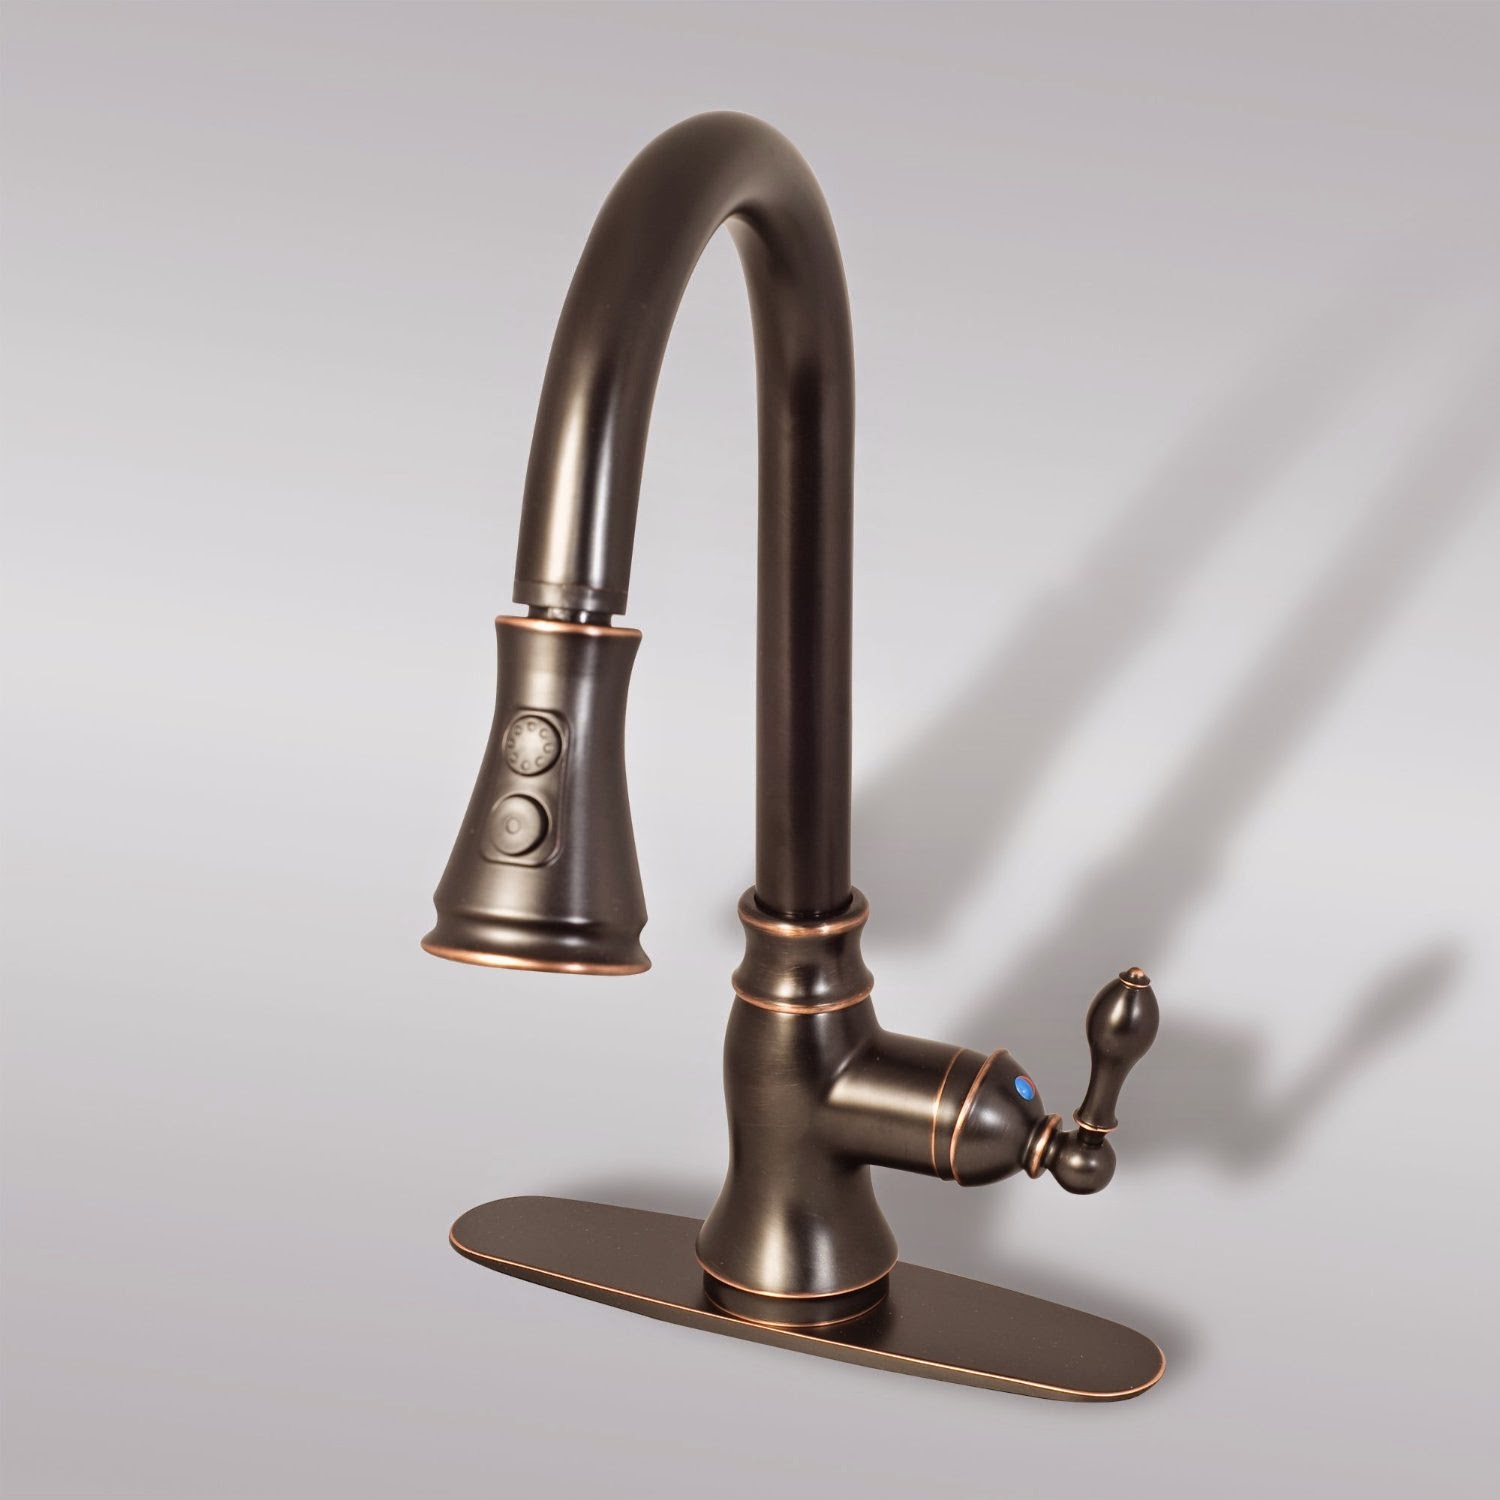 Oil Rubbed Bronze Kitchen Sink Faucet Led Pull Down Sprayer Mixer Tap Cover Home Faucets Garden Faucet Home Plumbing Fixtures Garden Faucet